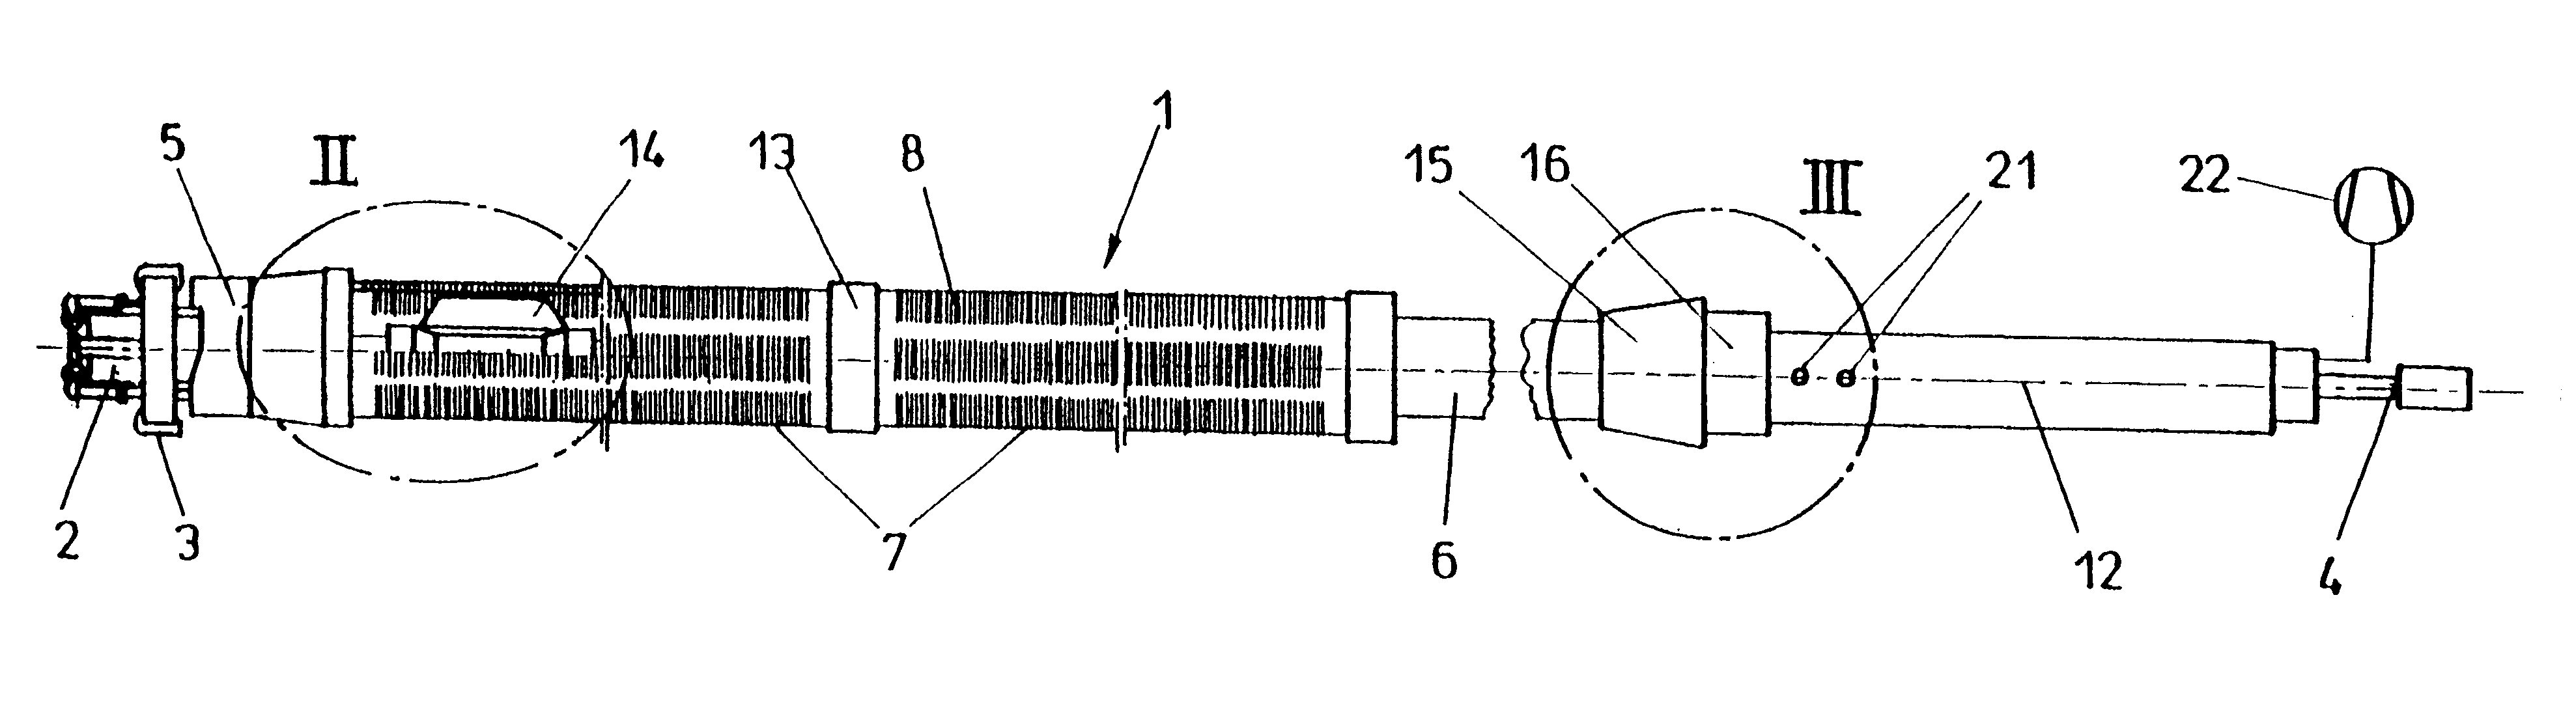 Device for drilling and draining holes in soil or rock